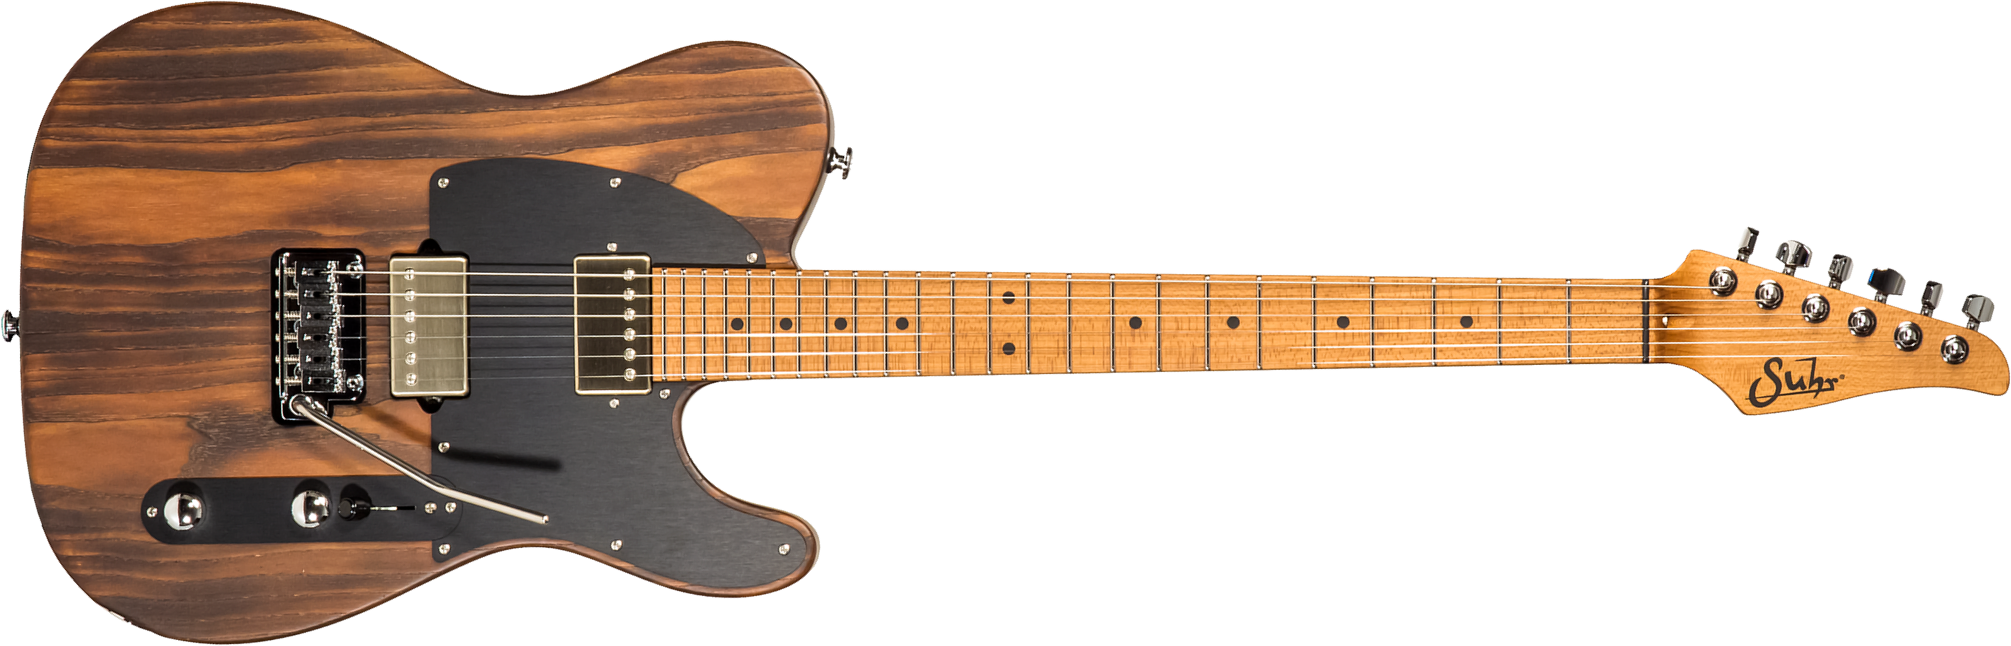 Suhr Andy Wood Modern T 01-sig-0033 Usa Signature 2h Trem Mn #72794 - Whiskey Barrel - Tel shape electric guitar - Main picture